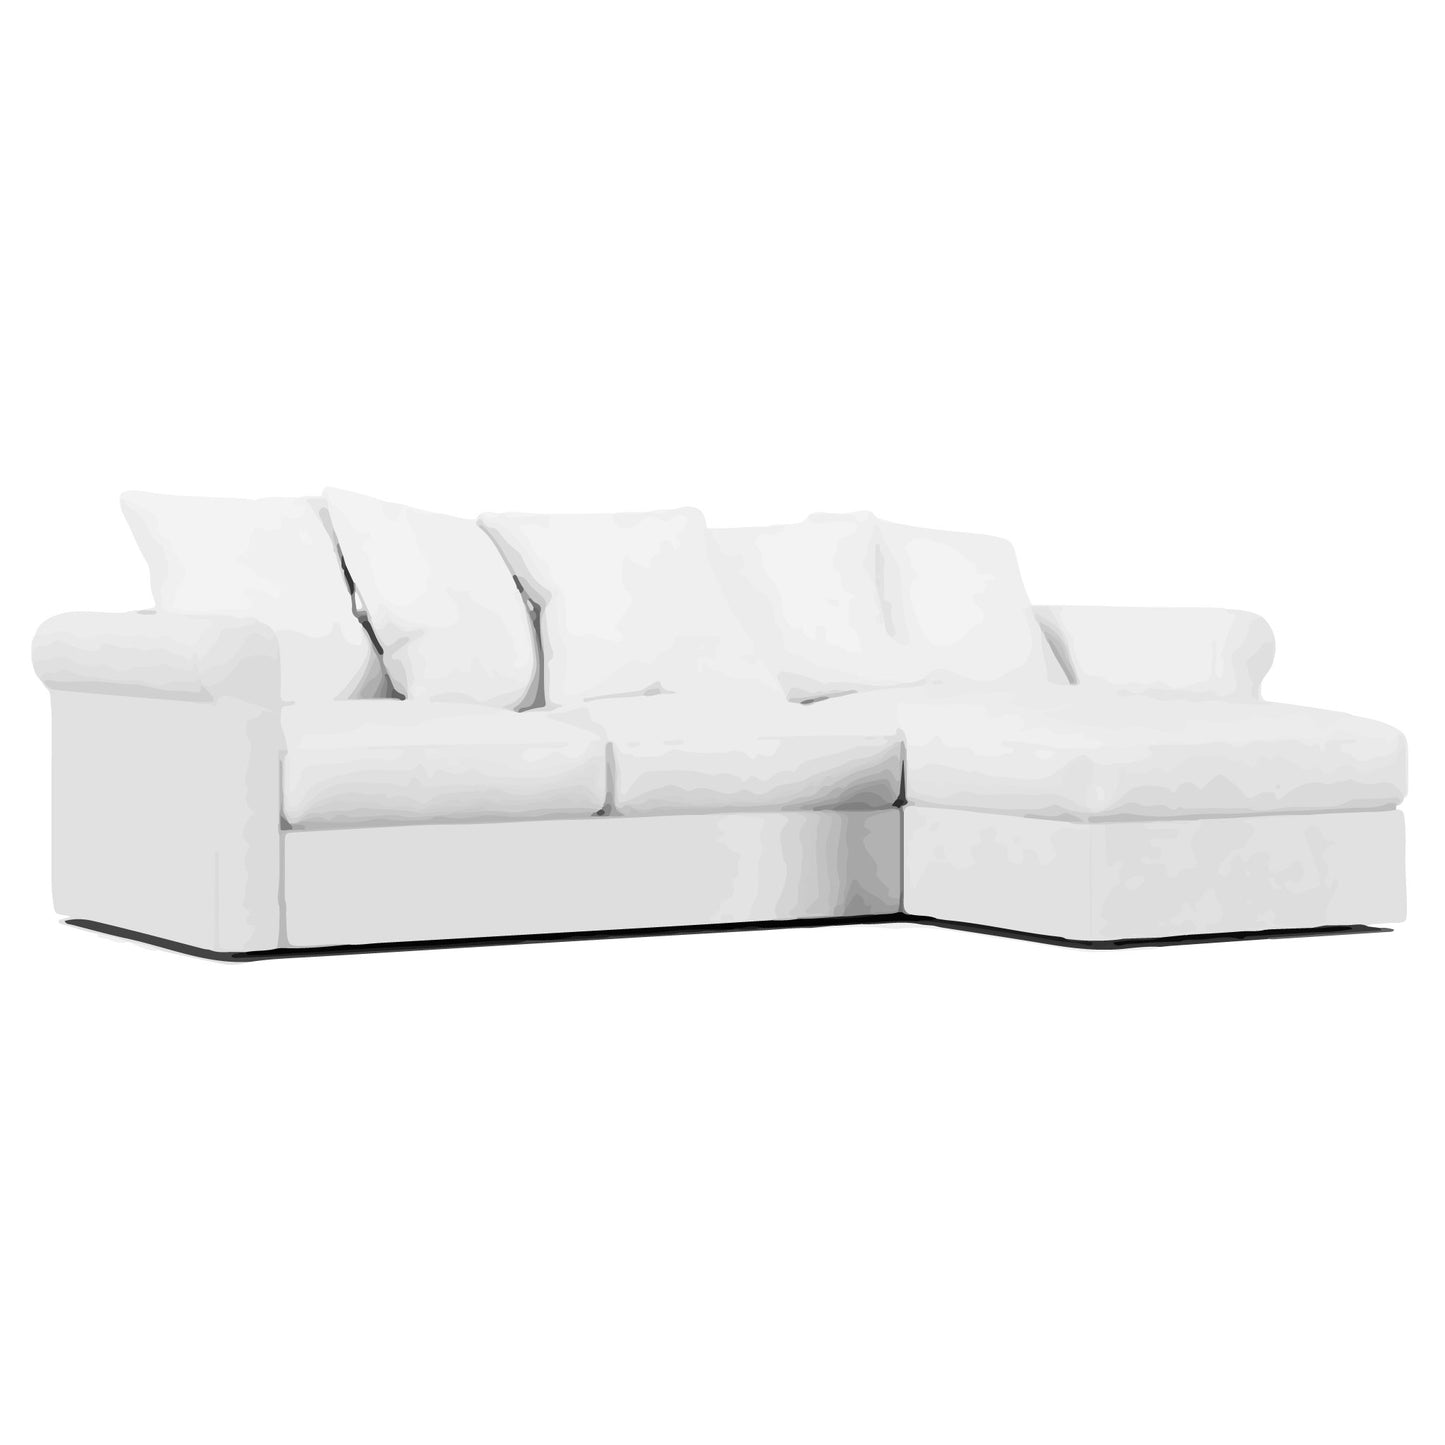 Gronlid 2 Seater Sofa with Chaise Cover